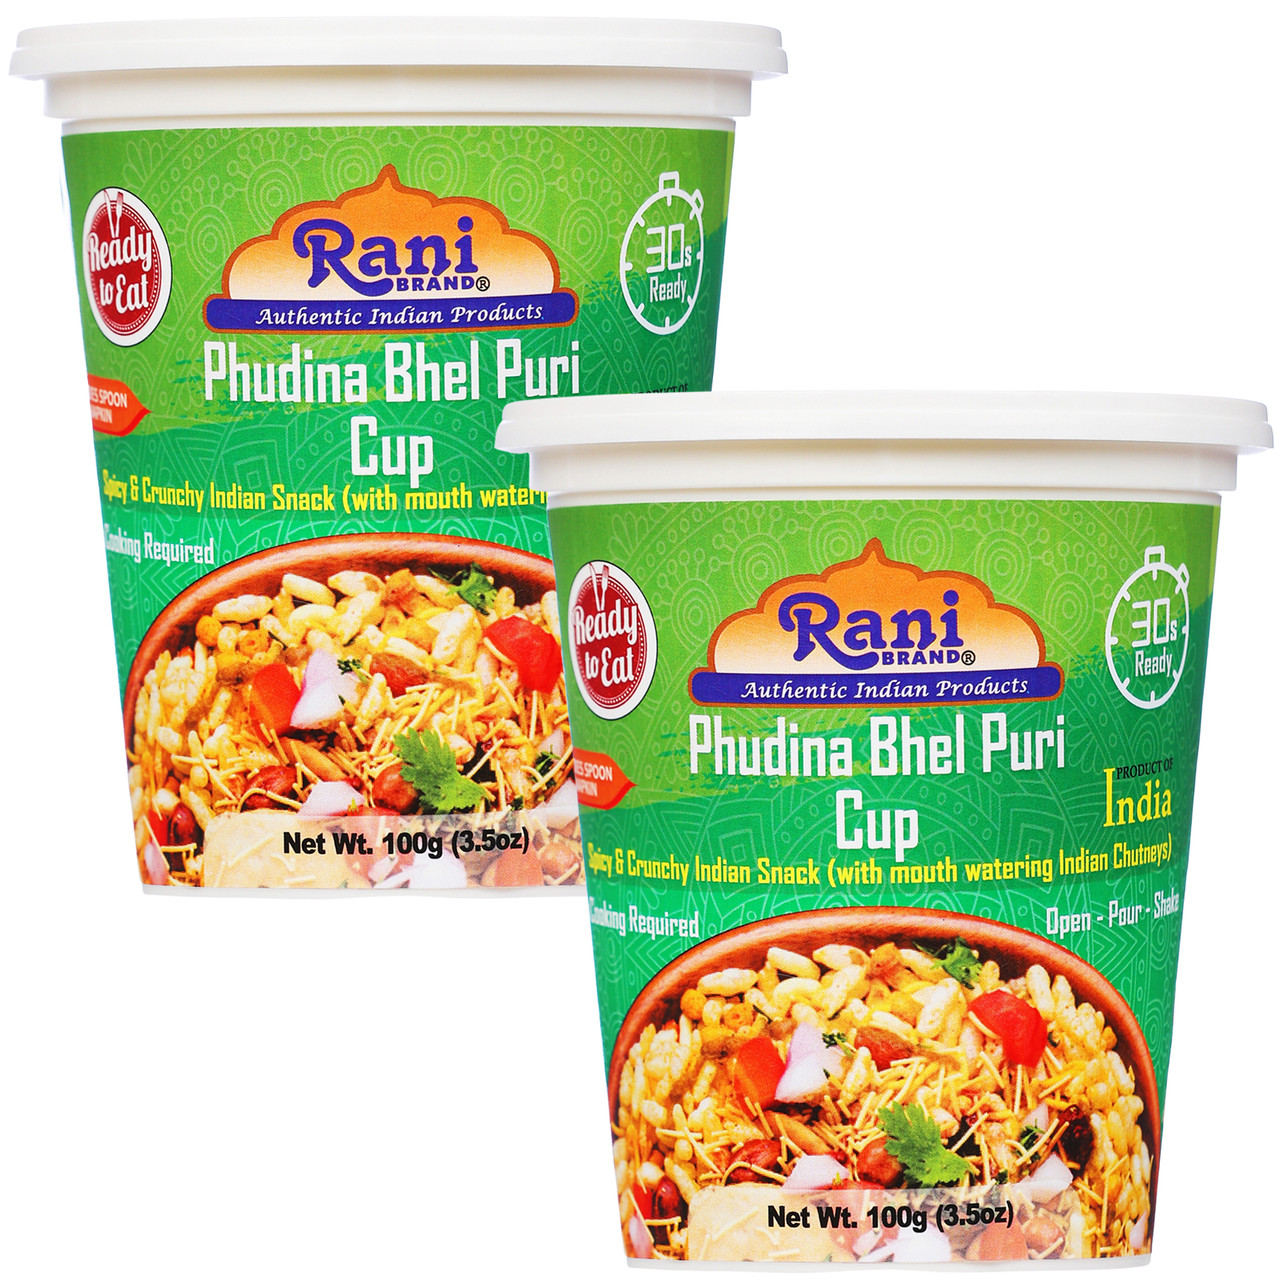 Rani Pudina Bhel Puri Cup (Spicy & Crunchy Indian Snack w/ mouth